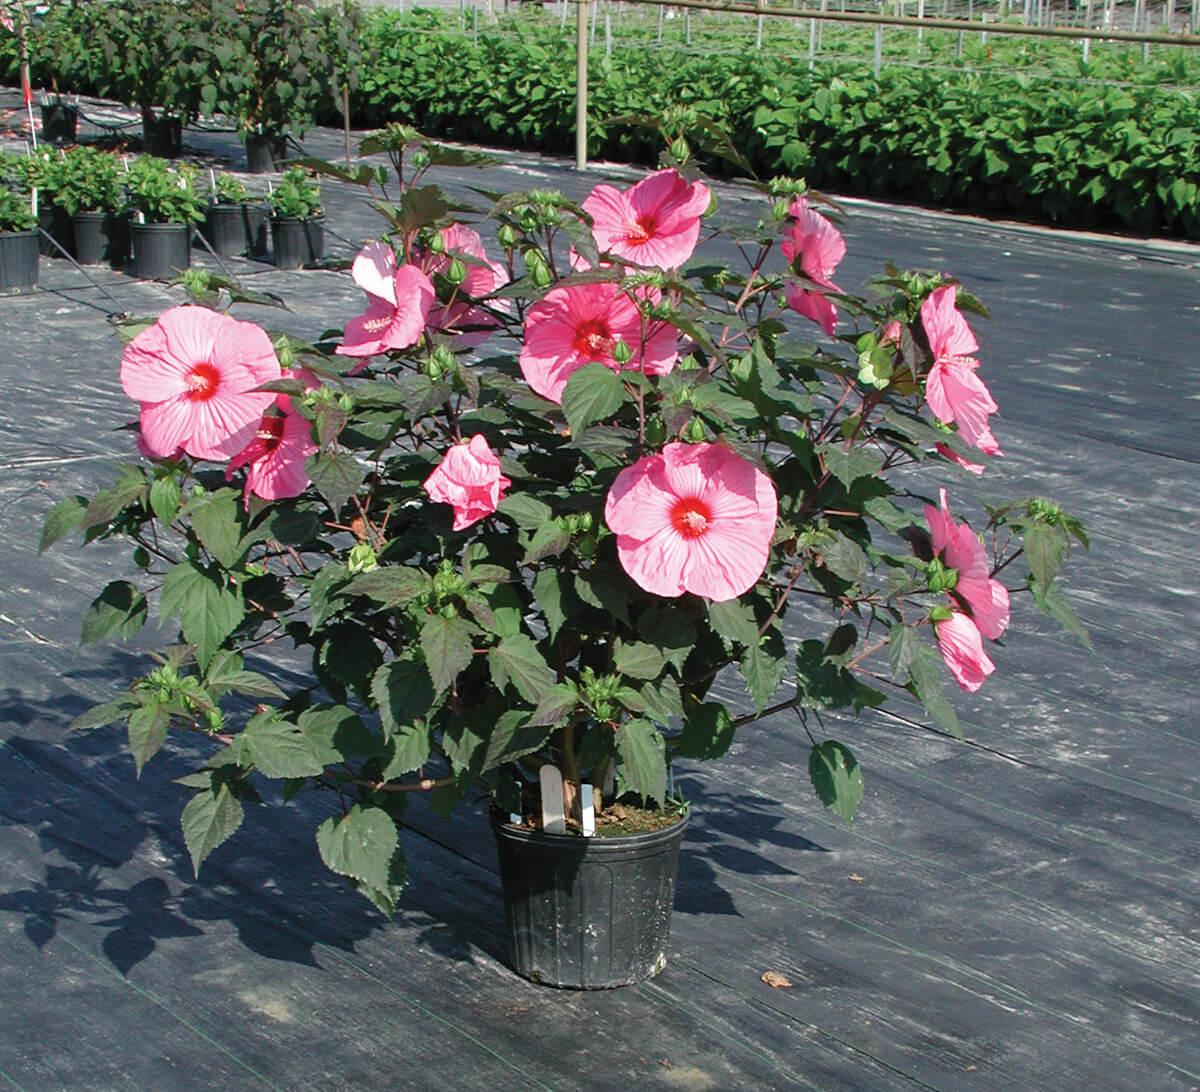 Rose Mallow 'Brandy Punch:' Pink Hibiscus Flower. Rozanne™